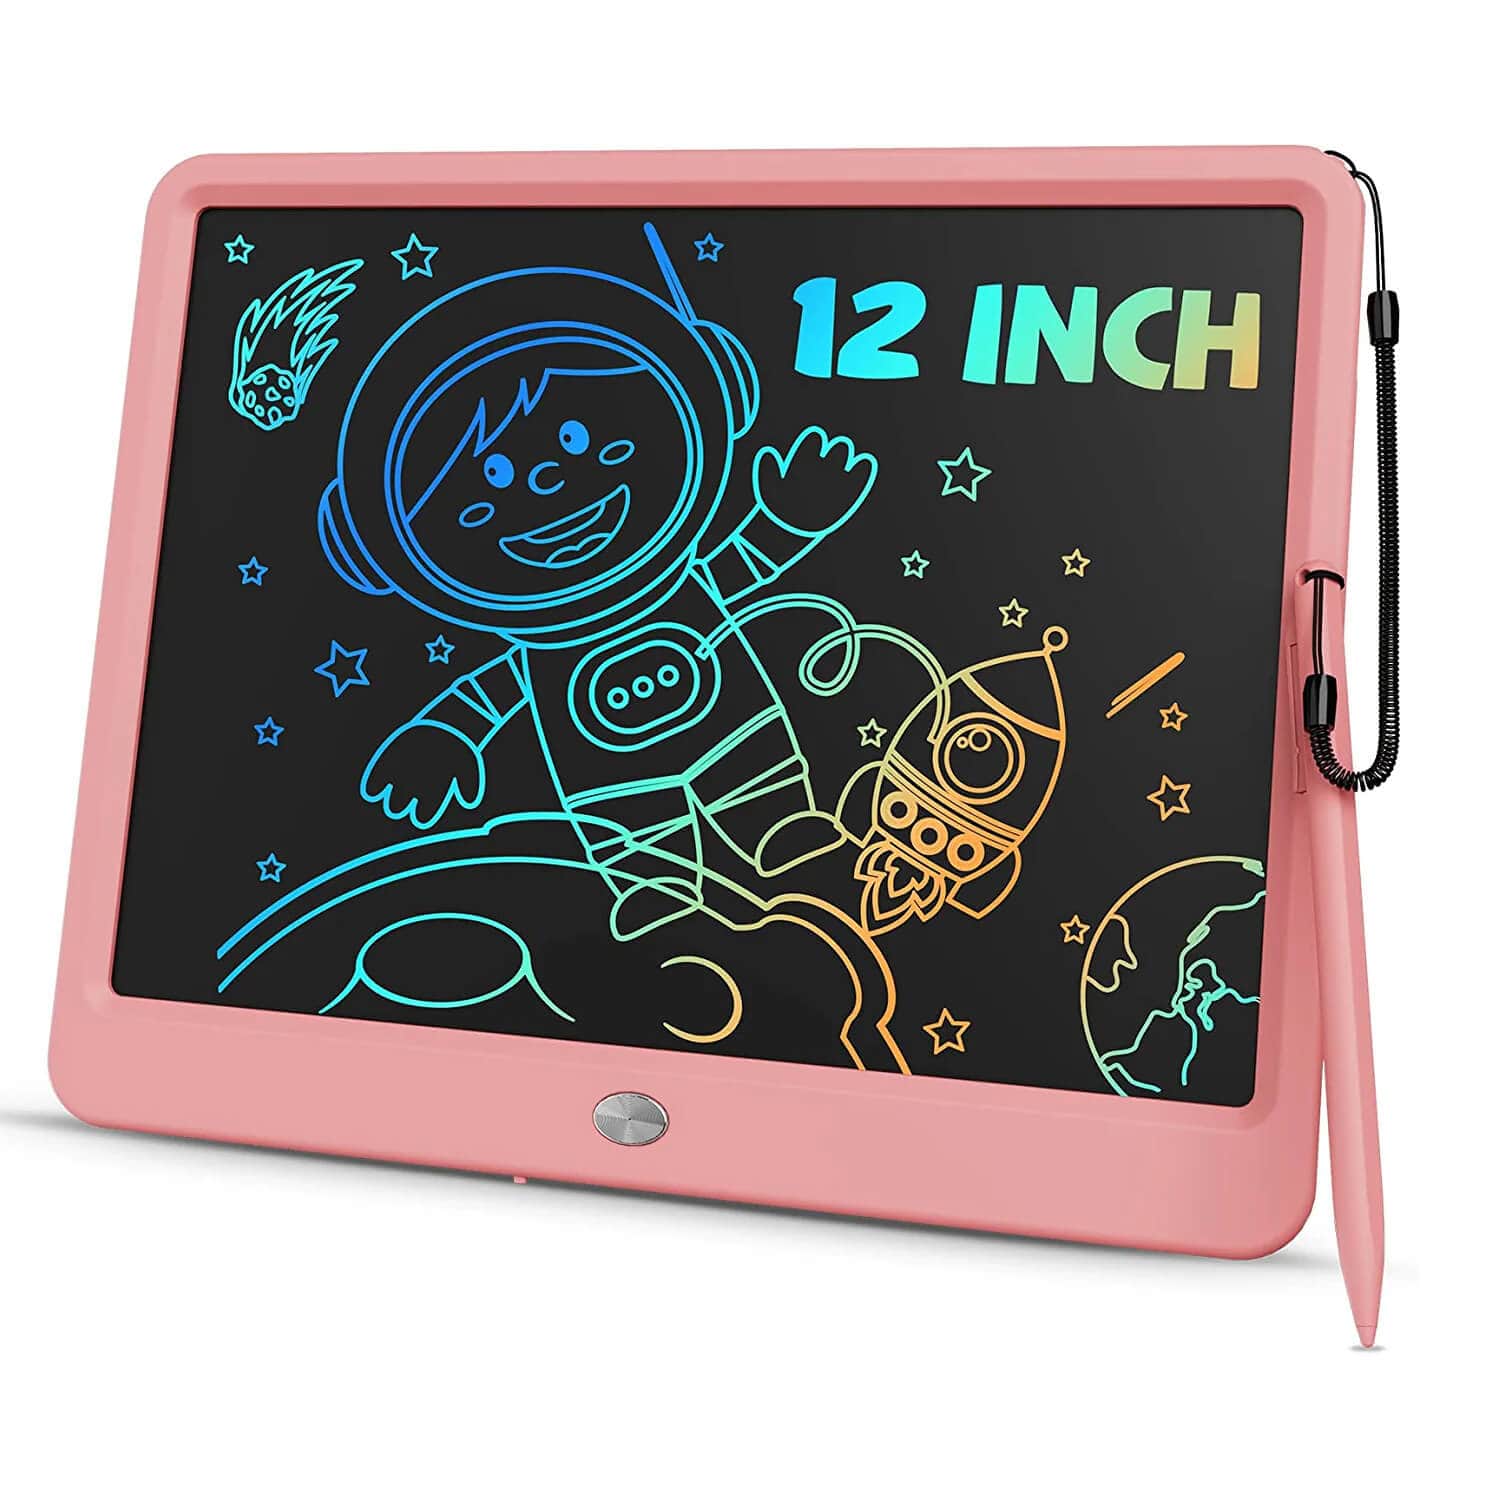 12 LCD drawing tablet for kids – Ludikid